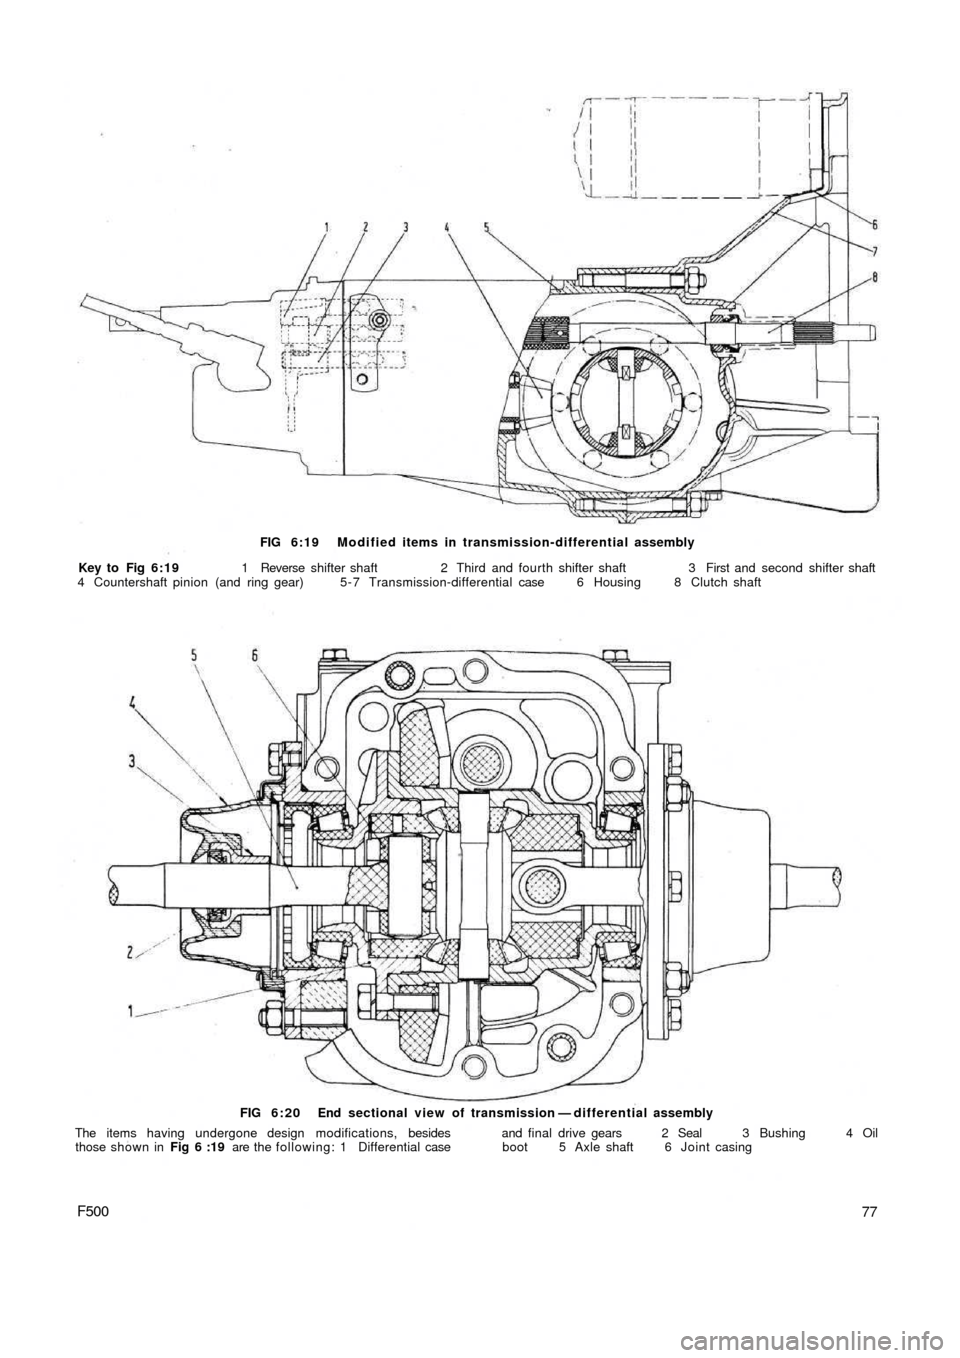 FIAT 500 1968 1.G Workshop Manual FIG 6:19 Modified items in transmission-differential assembly
Key to  Fig  6:19 1 Reverse shifter shaft  2 Third and fourth shifter shaft  3 First and second shifter shaft
4 Countershaft pinion (and r